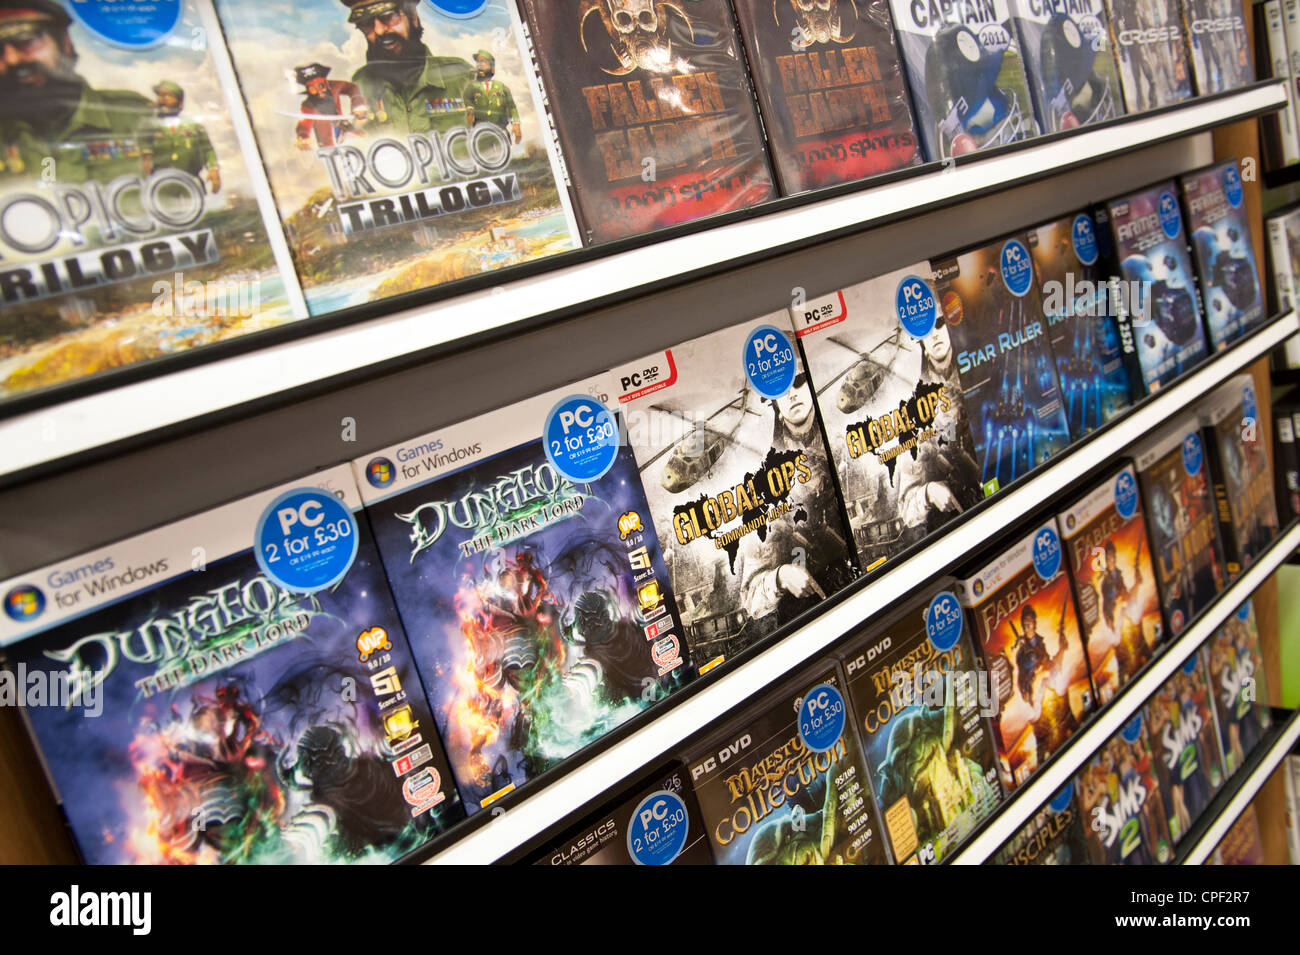 PC computer games for sale at Game shop, England, UK Stock Photo - Alamy